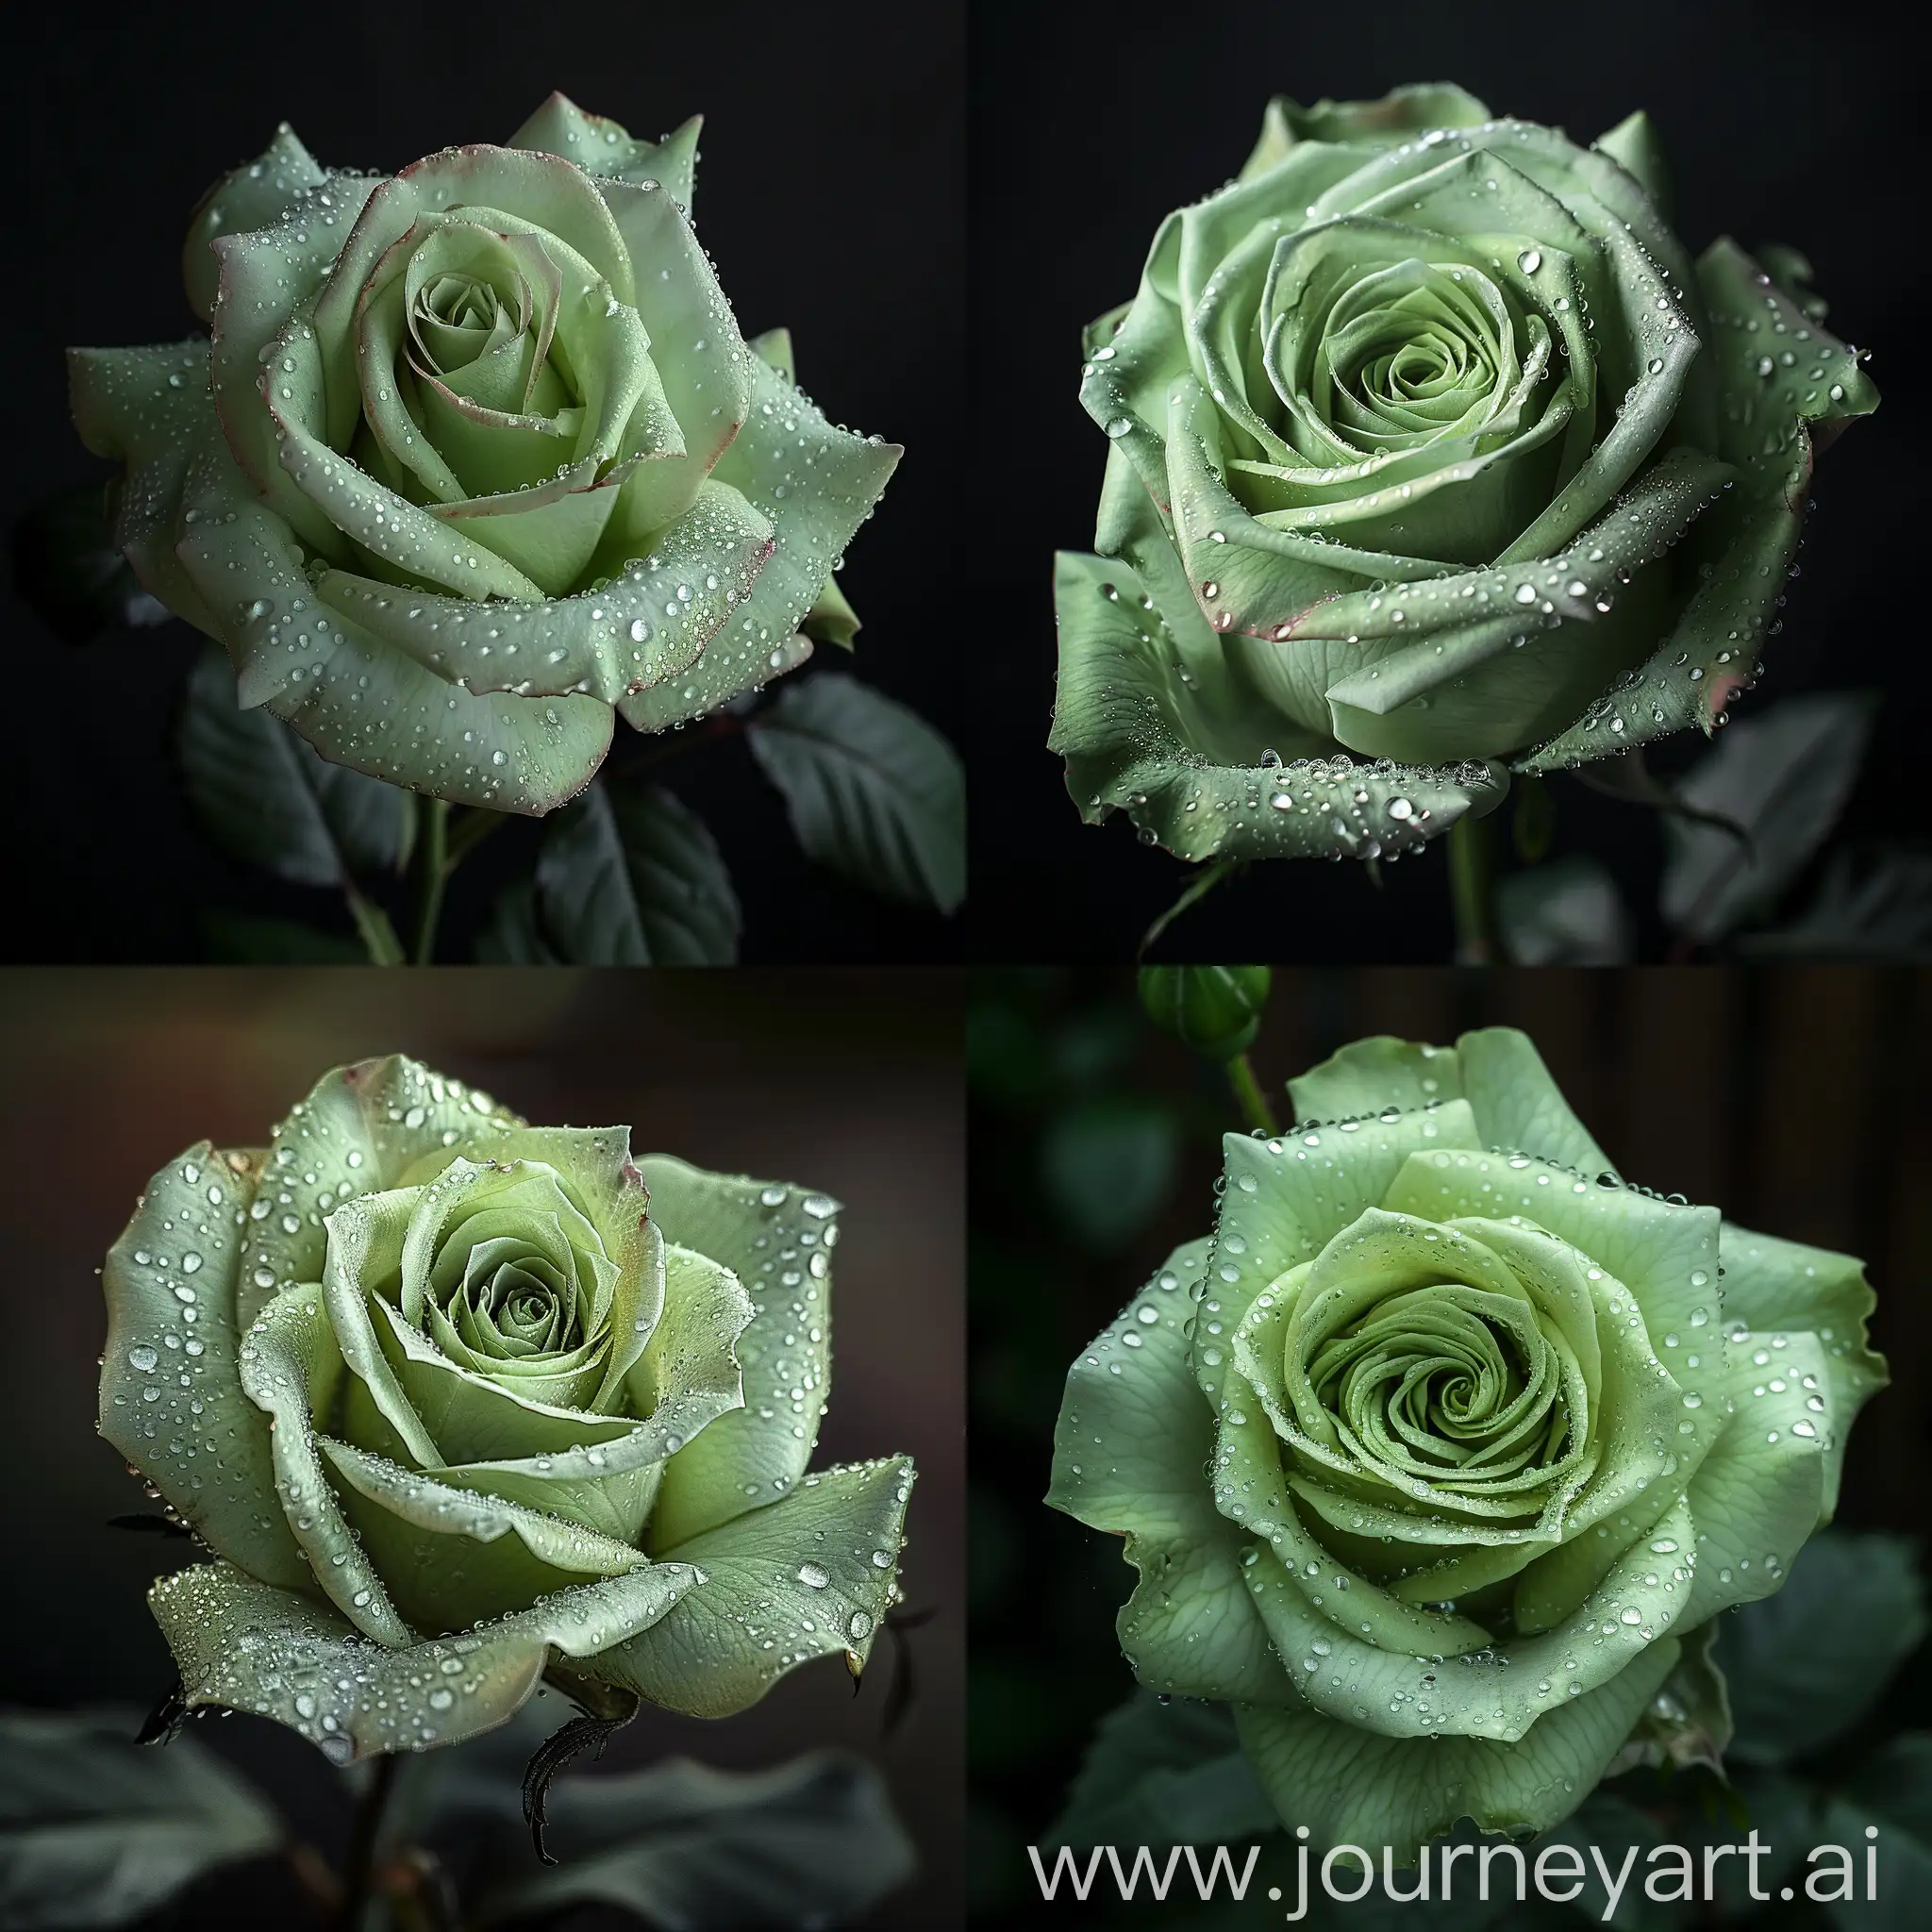 Realistic-CloseUp-of-a-Light-Green-Rose-with-Drops-Elegant-Photorealism-in-Natural-Lighting